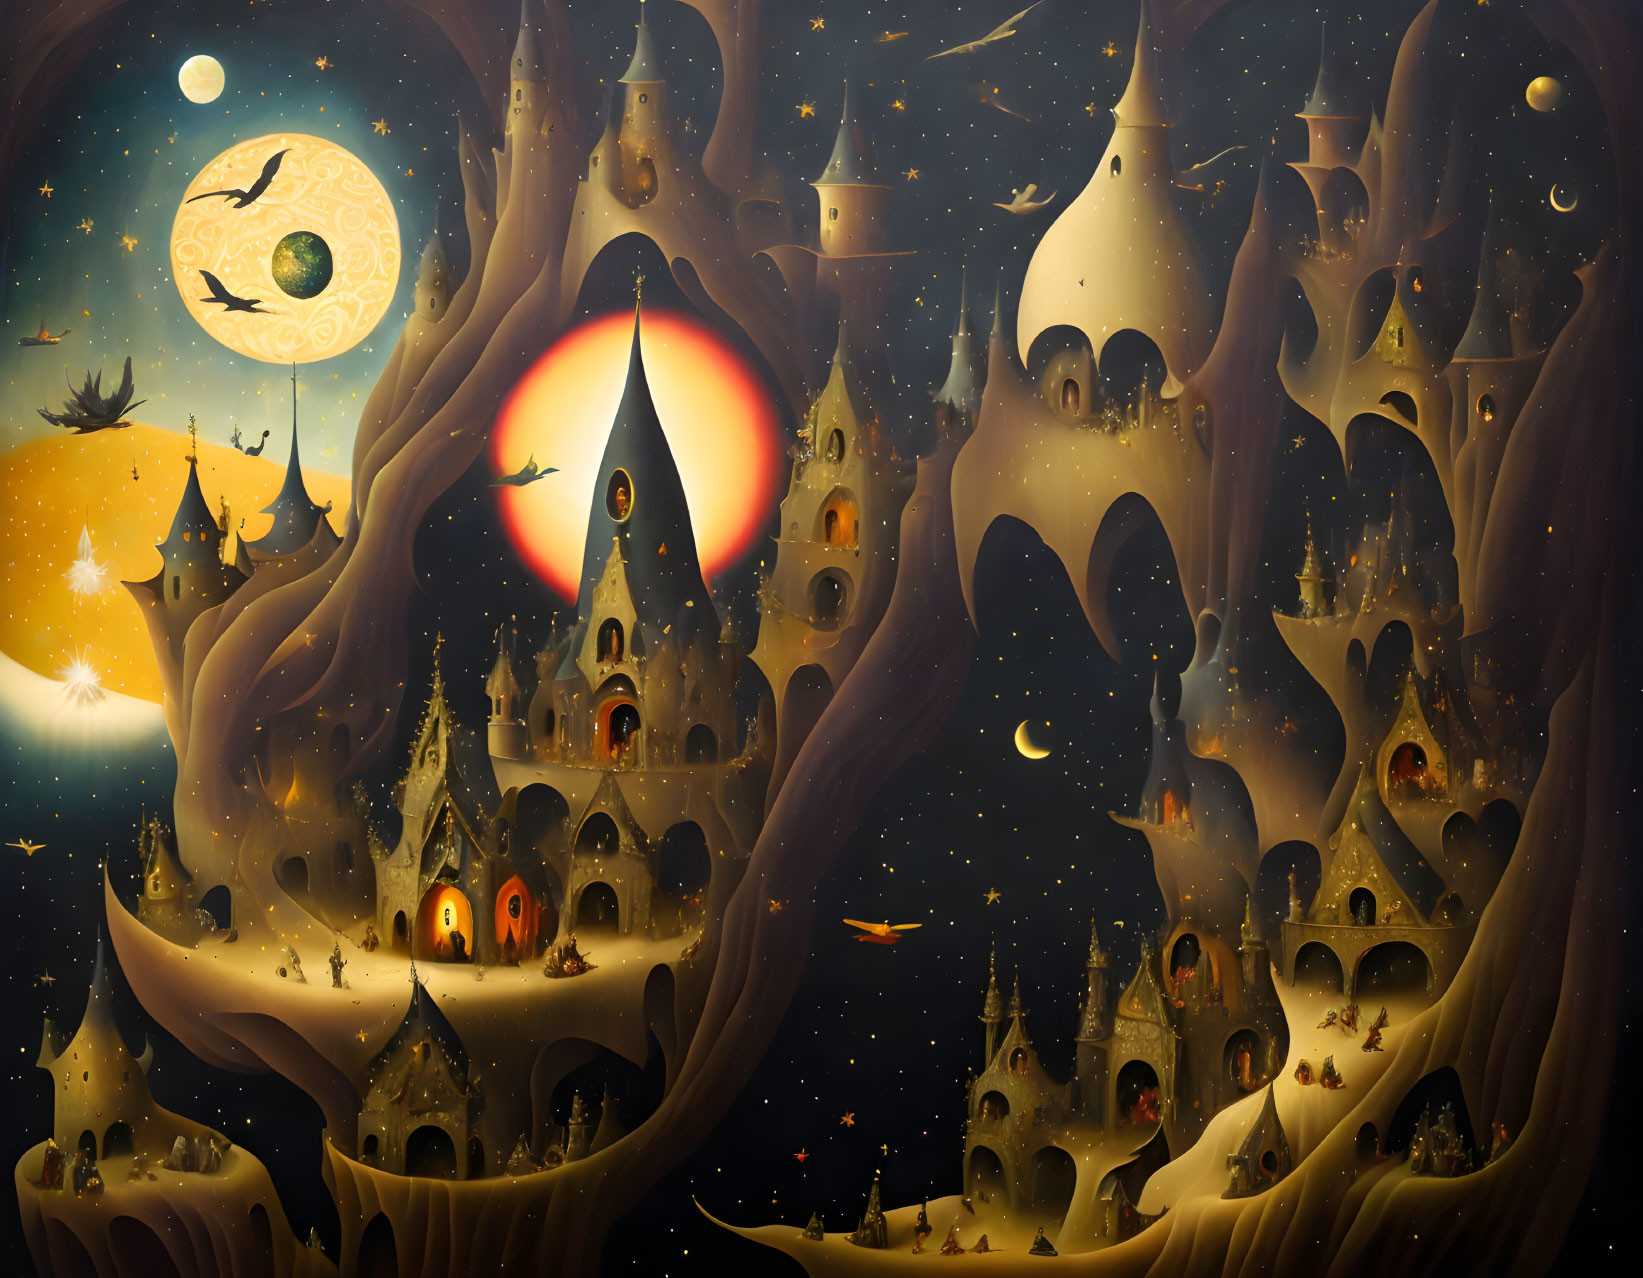 Nocturnal scene with moon, treehouses, bats, witch on broomstick